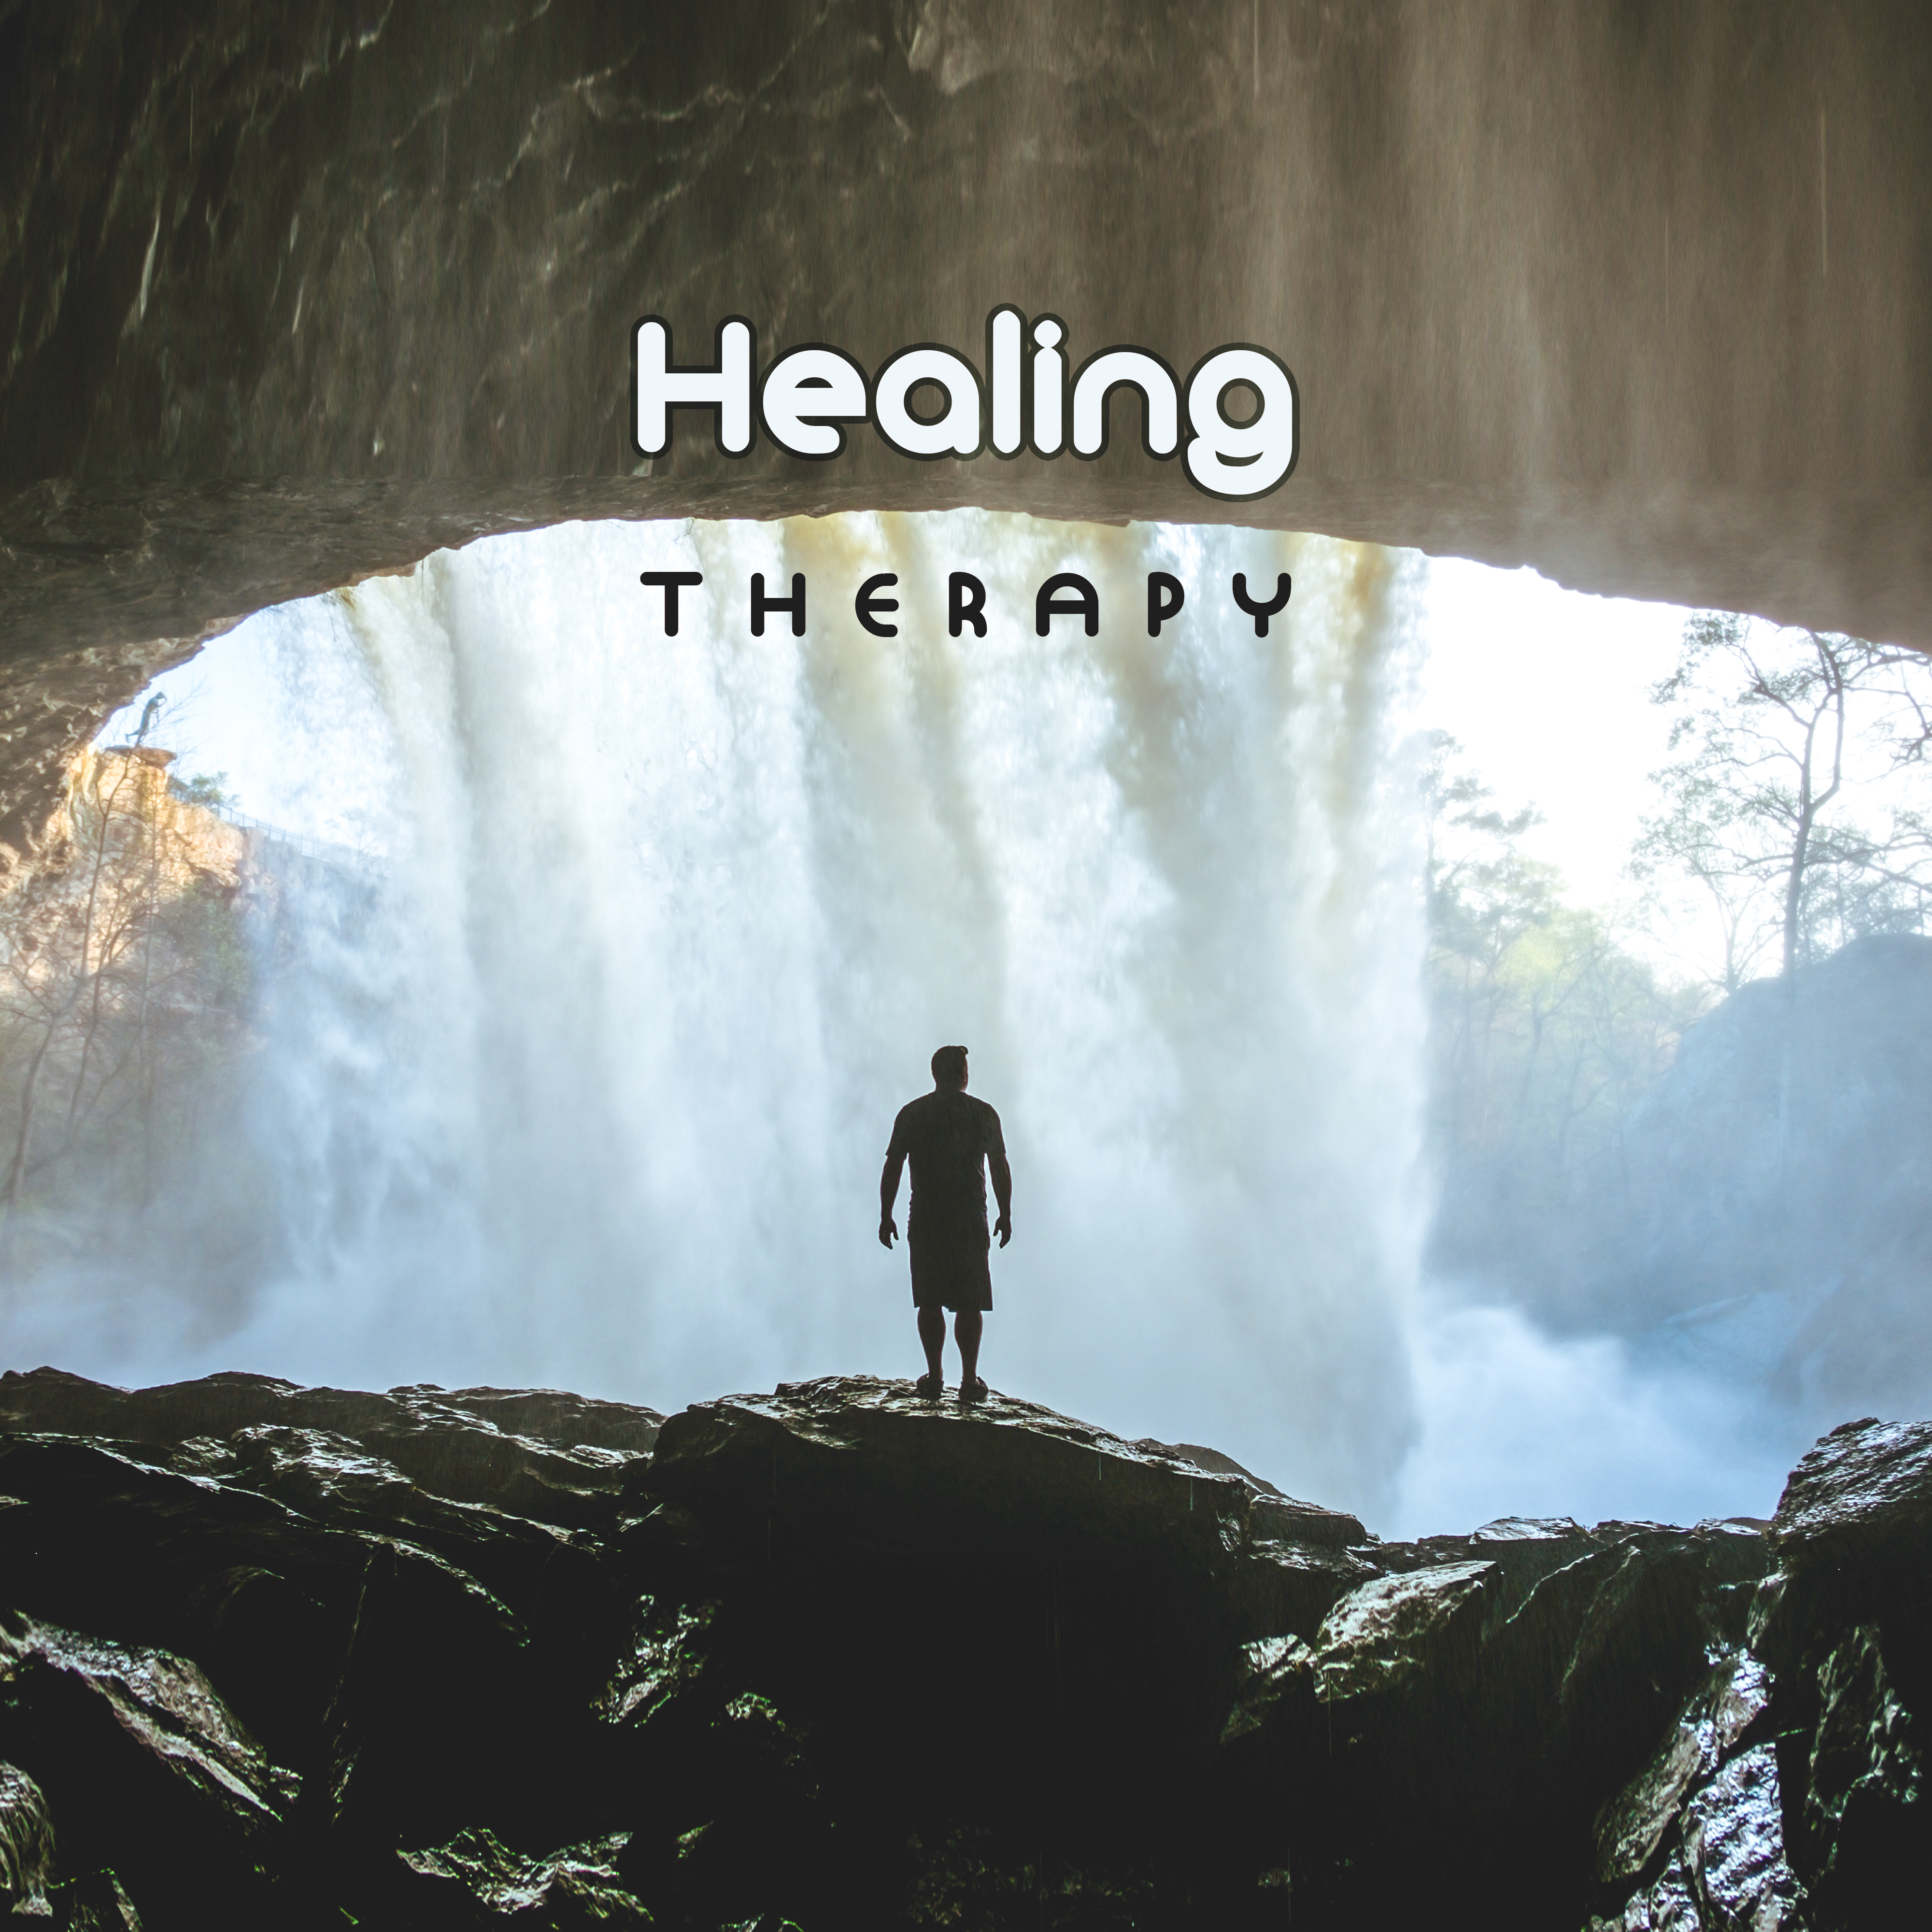 Healing Therapy  Peaceful Music to Rest, Pure Relaxation, Stress Relief, Sounds of Water, Deep Sleep, Calm Mind, Nature Sounds